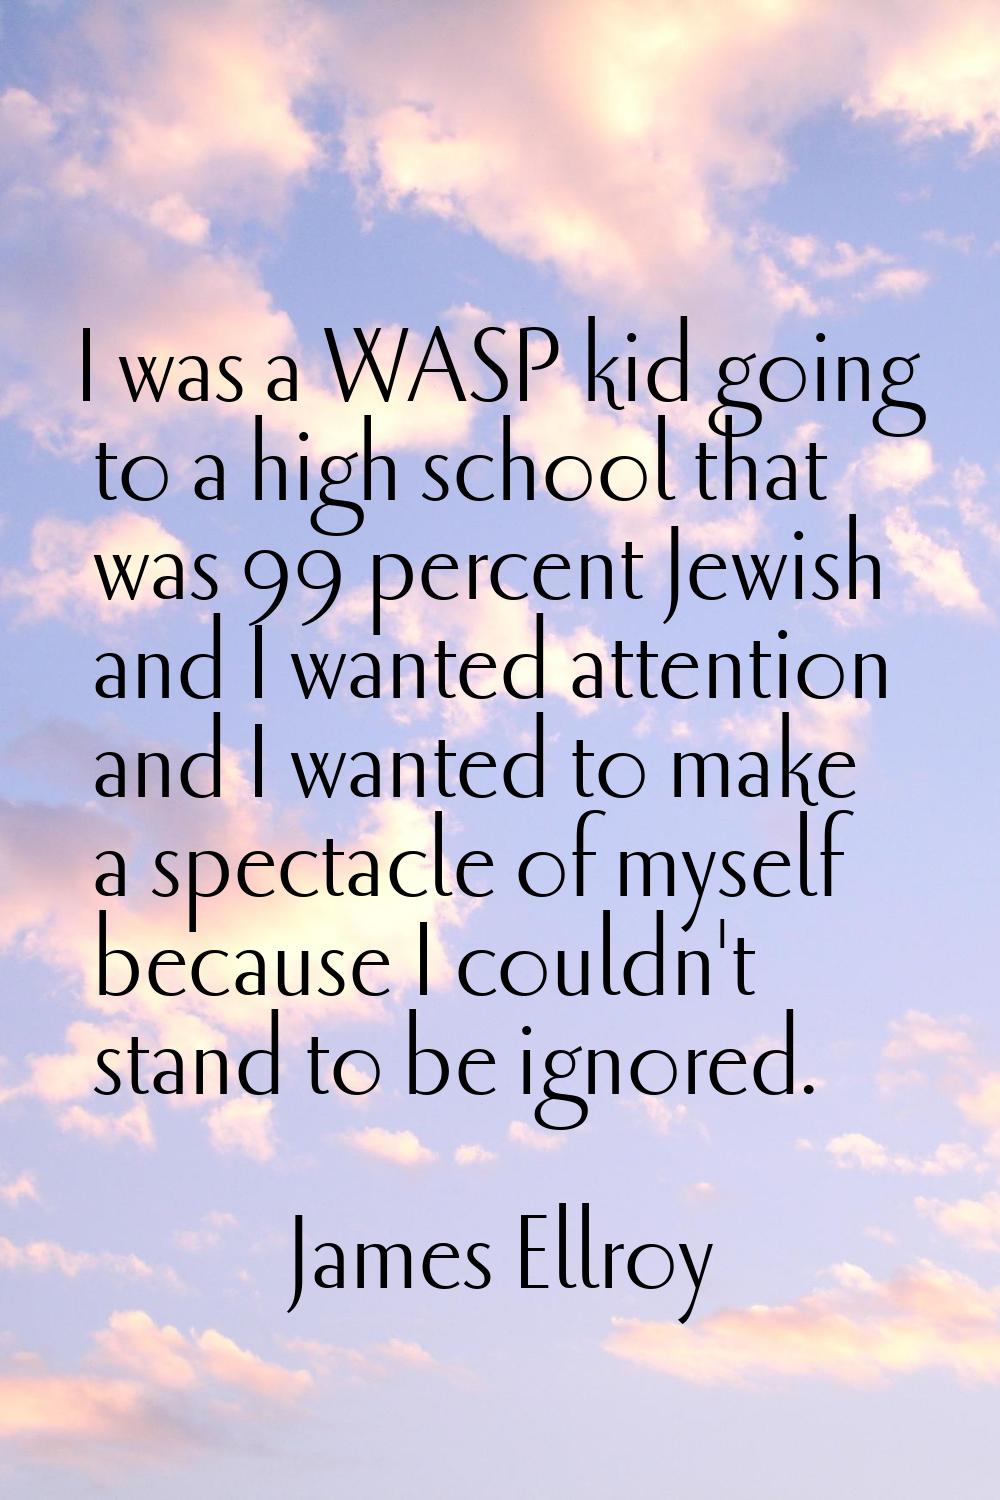 I was a WASP kid going to a high school that was 99 percent Jewish and I wanted attention and I wan